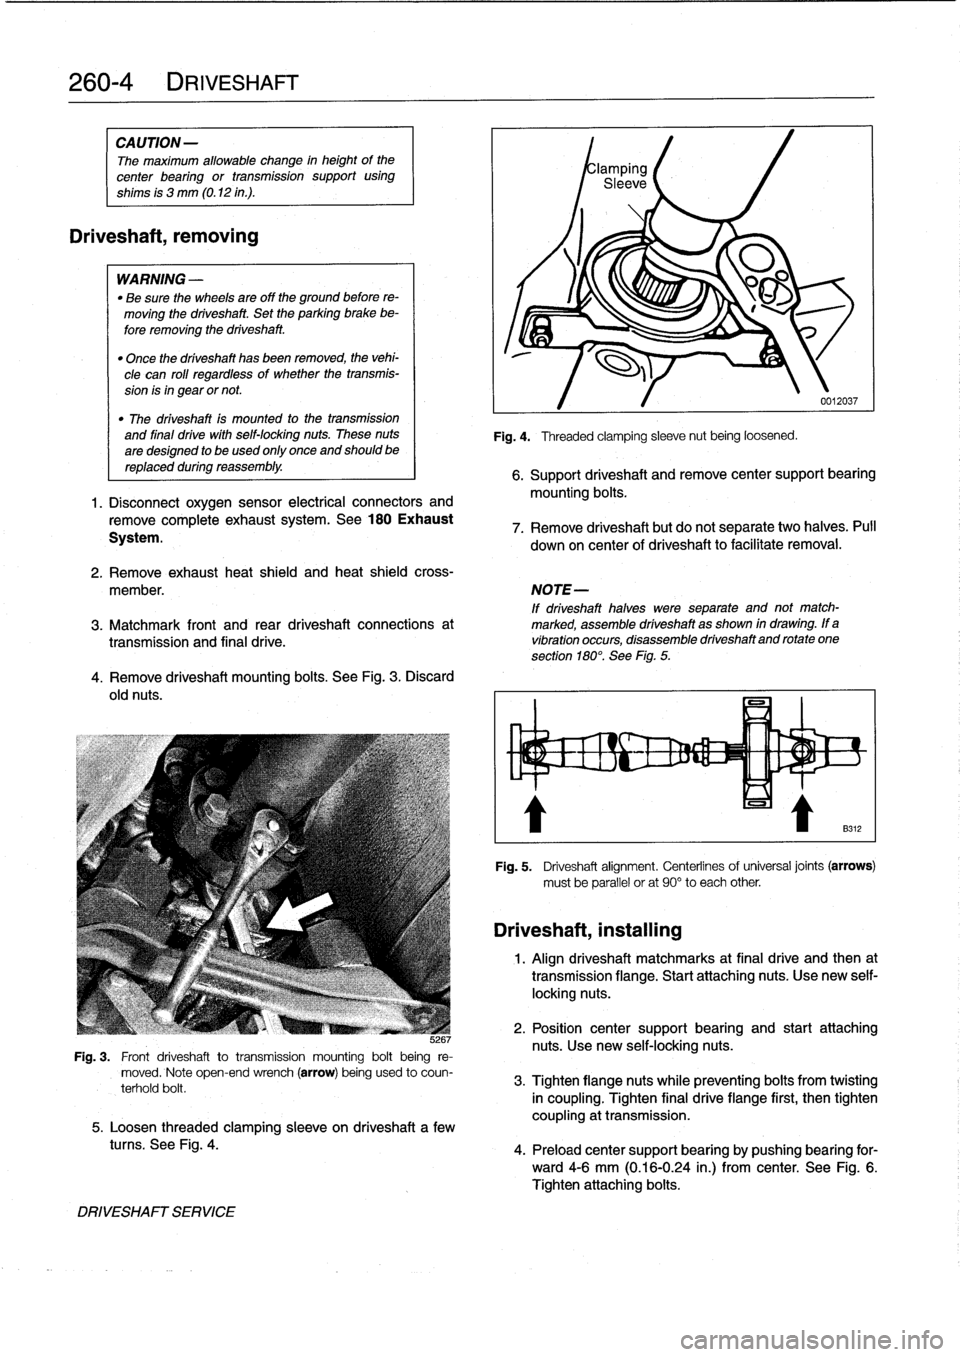 BMW 325i 1994 E36 Workshop Manual 
260-
4
DRIVESHAFT

CAUTION
-

The
maximum
allowable
change
in
height
of
the

center
bearing
or
transmission
support
using

shims
is
3
mm
(0
.12
in
.)
.

Driveshaft,
removing

WARNING
-

"
Be
sure
the